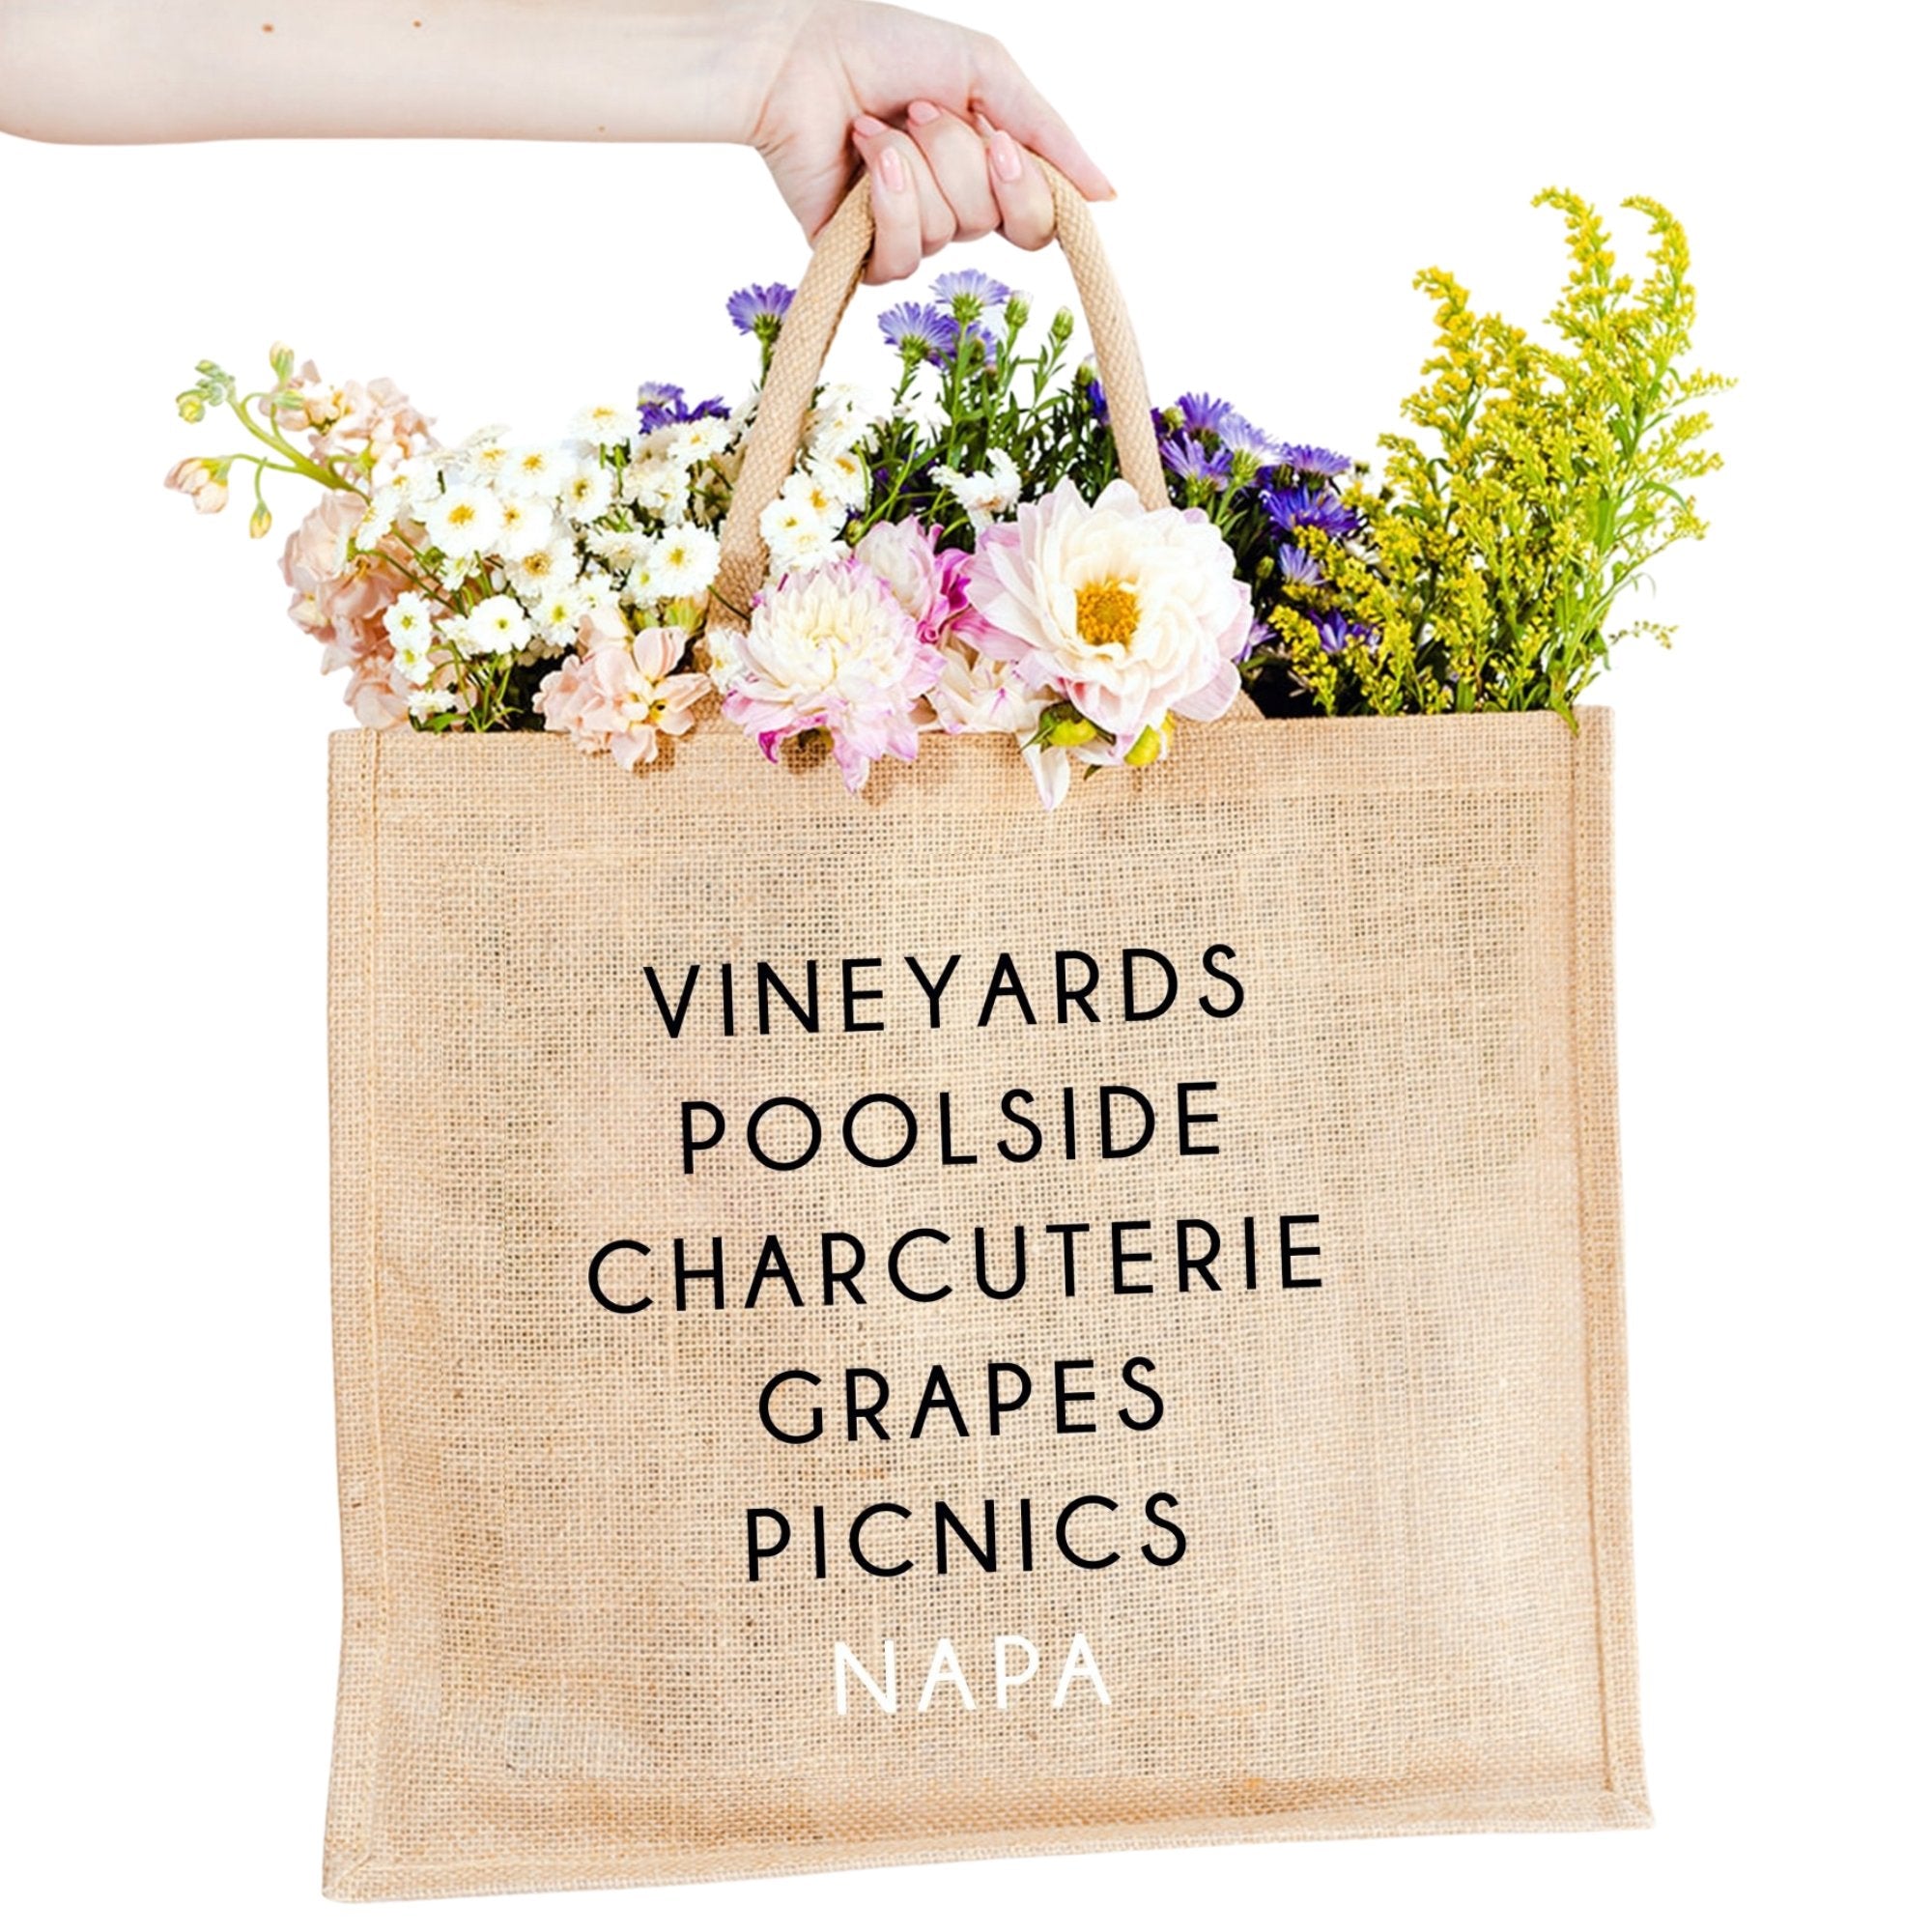 A jute carryall tote customized with sayings about NAPA